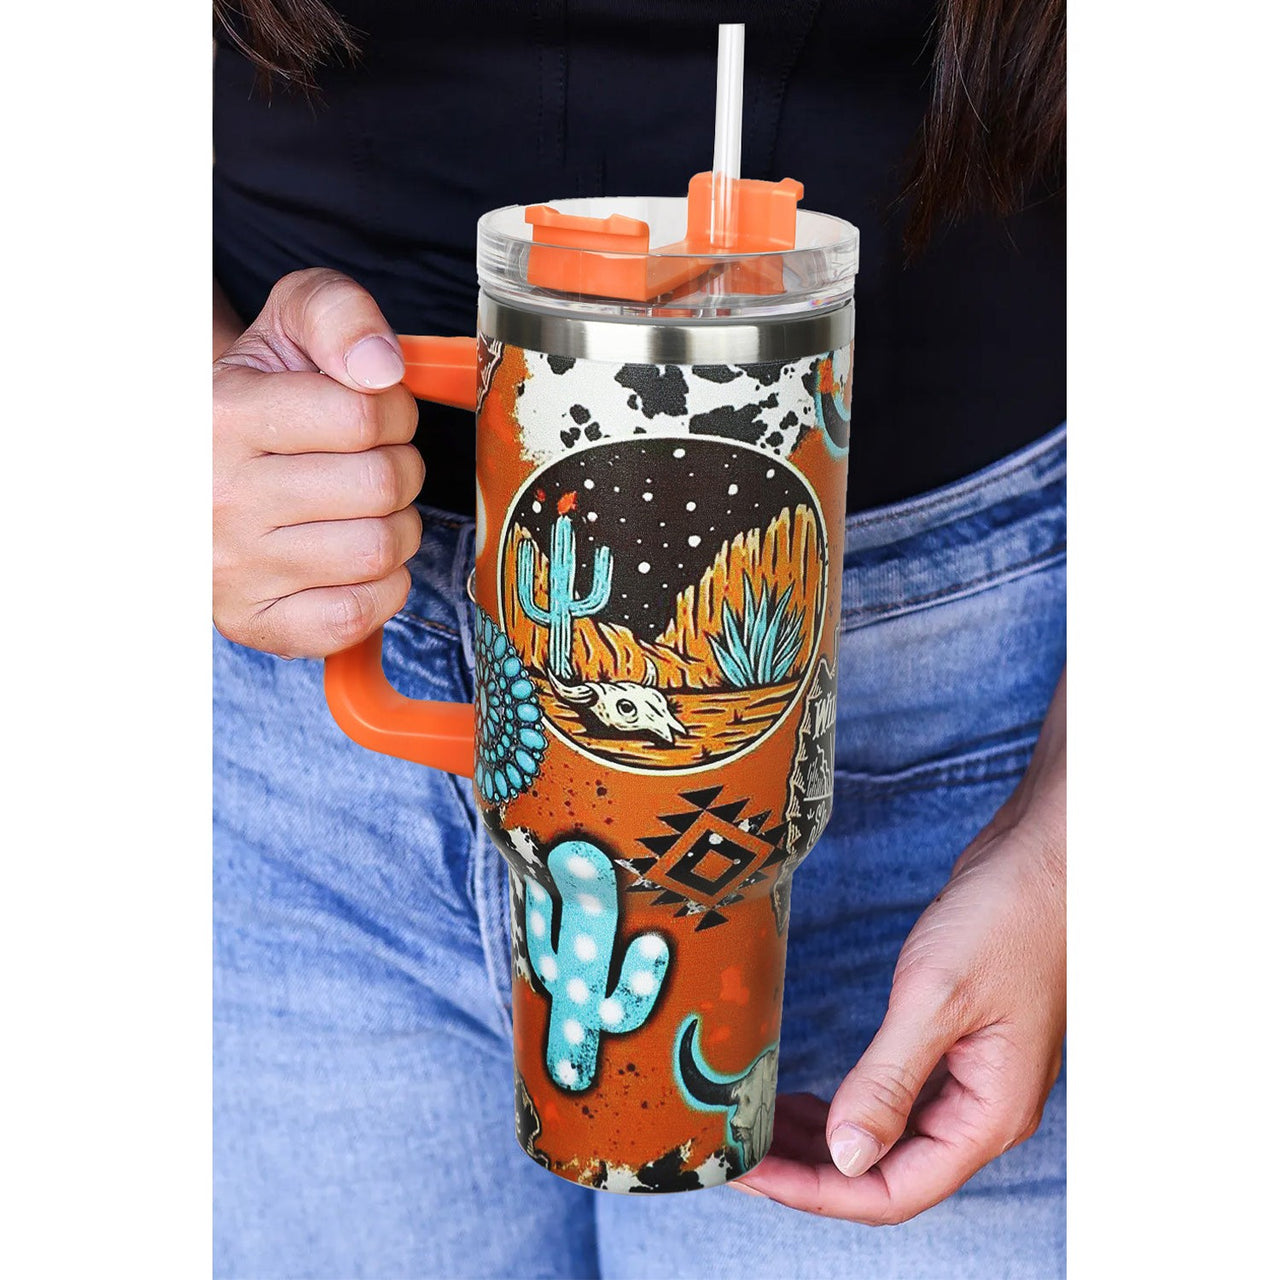 Dear Lover 40oz Western Graphic Handled Stainless Steel Tumbler Cup - Orange